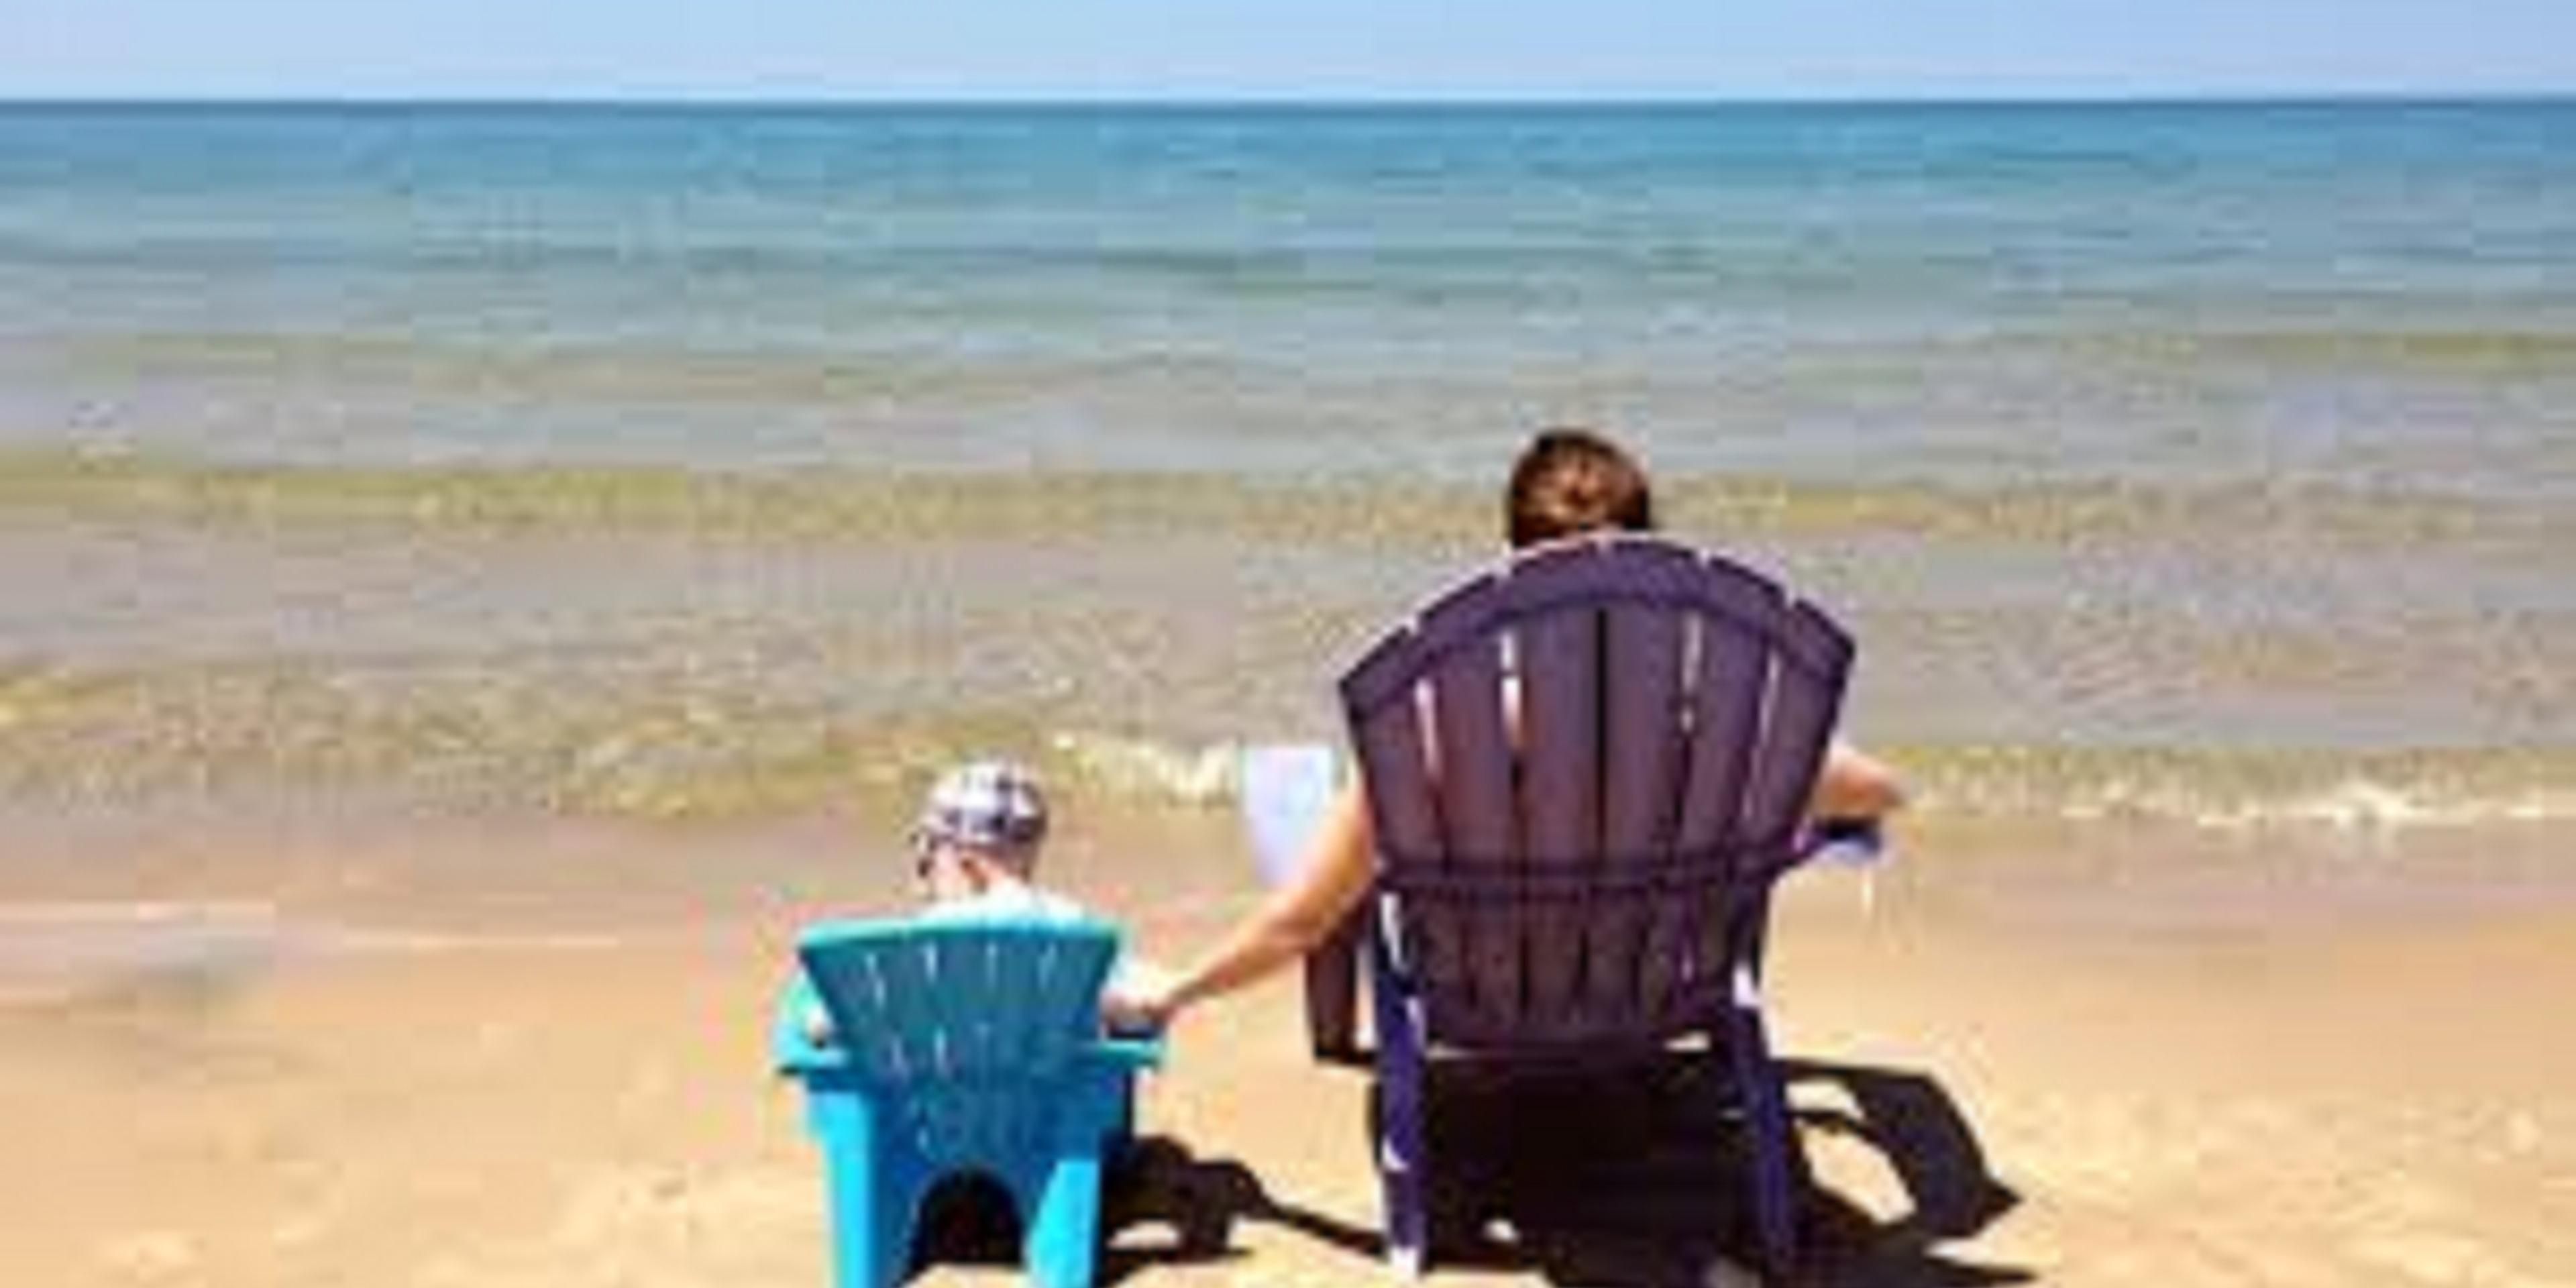 Enjoy the day this summer at one of Alpena's many public beaches along Lake Huron.